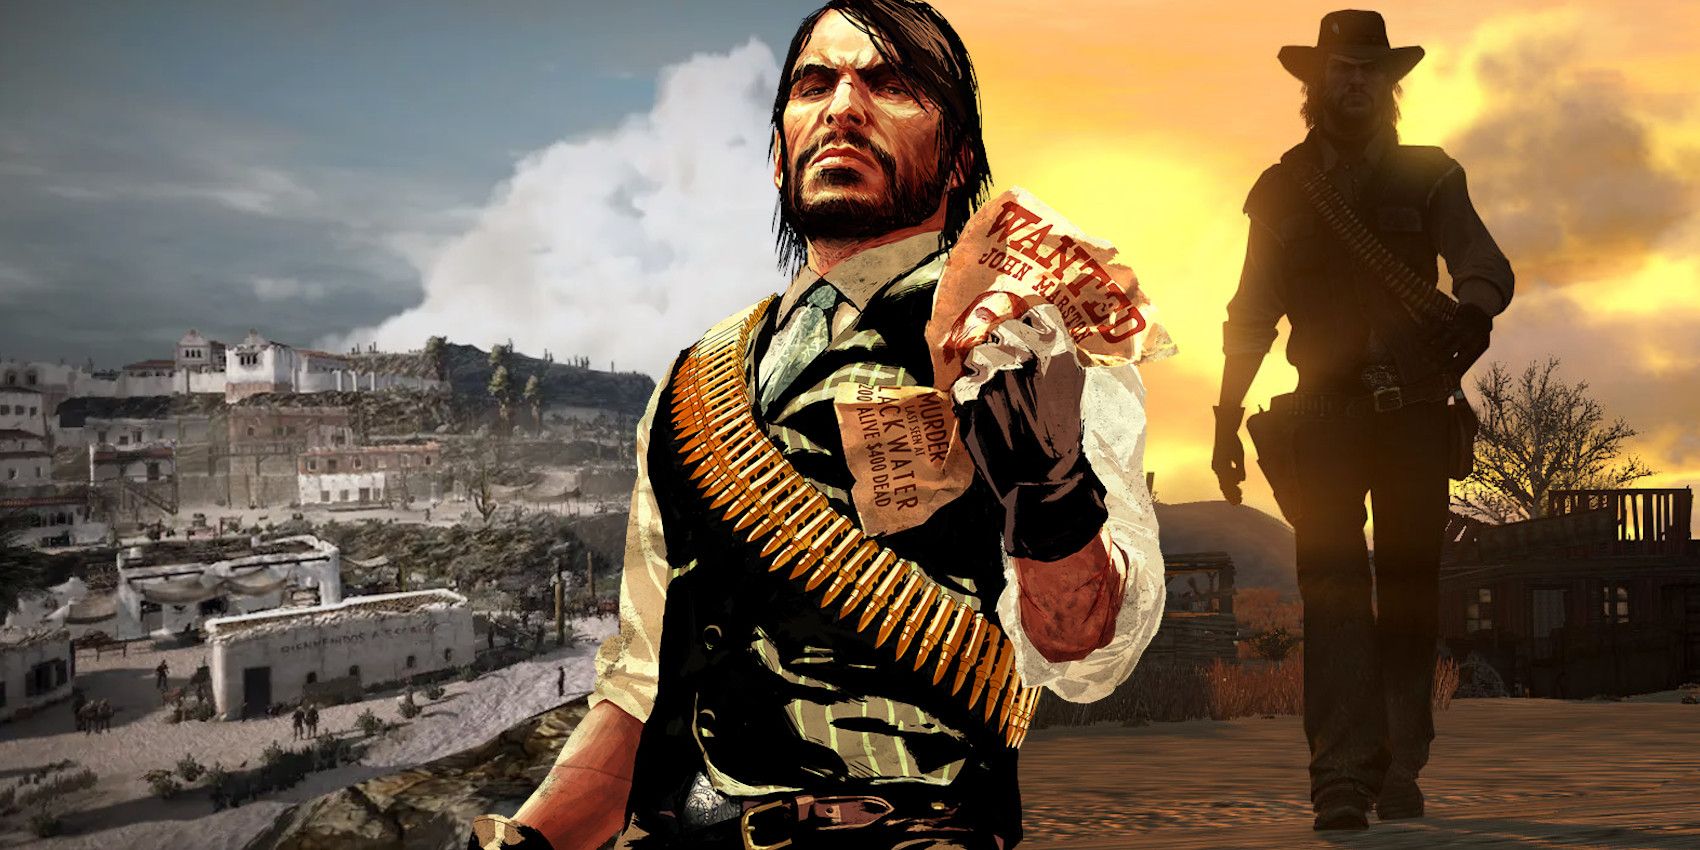 John Marston from Red Dead Redemption in front of a town and a silhouette